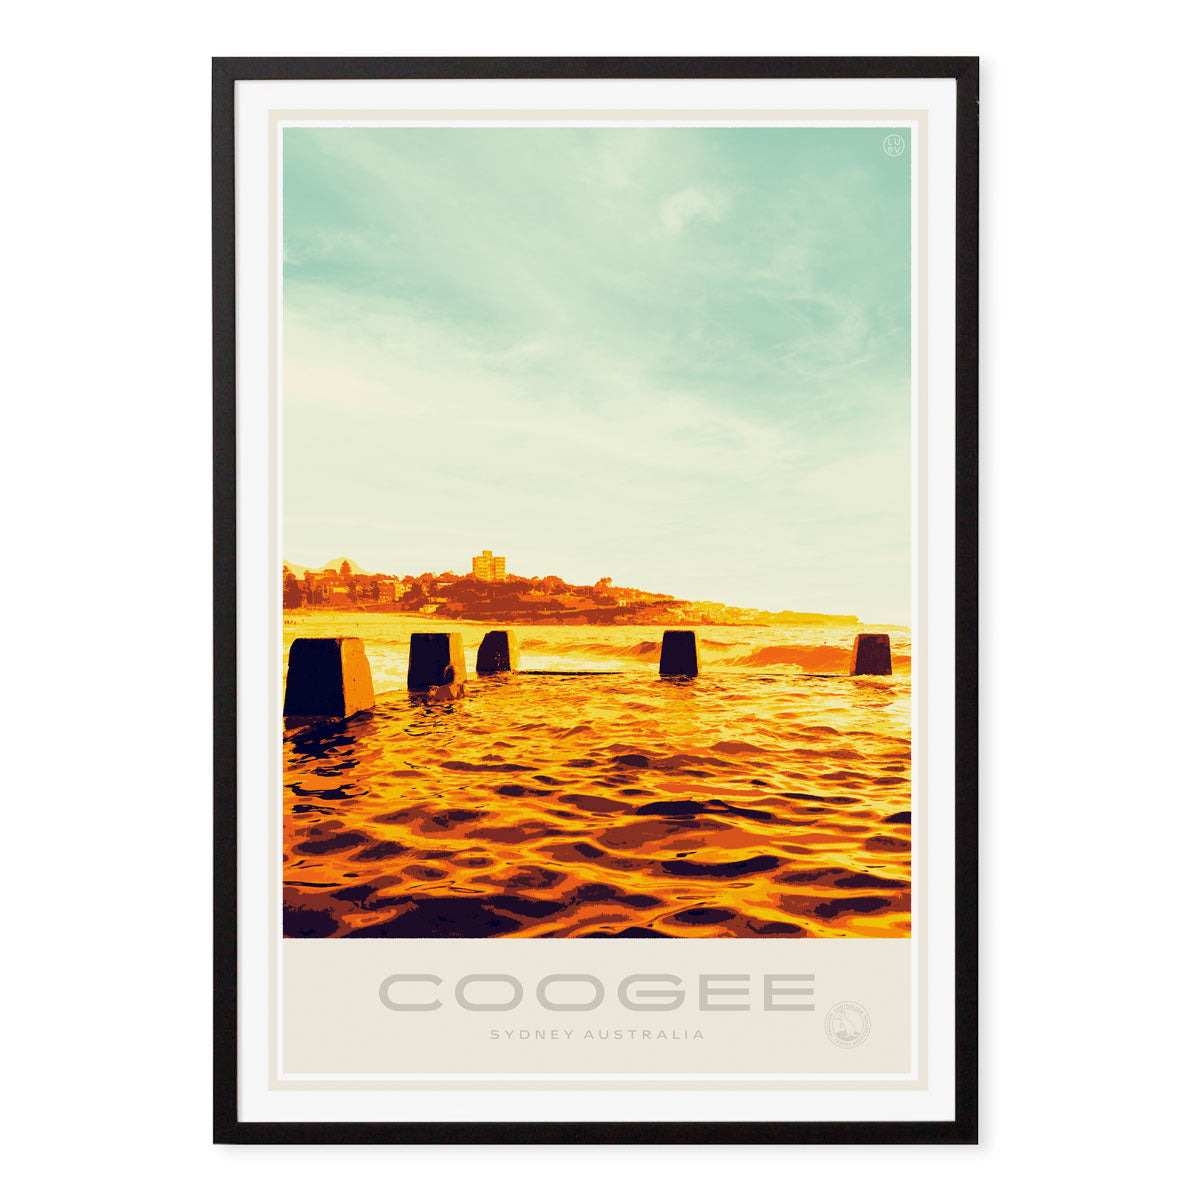 Coogee Pool Sydney vintage travel style poster print in black frame by places we luv